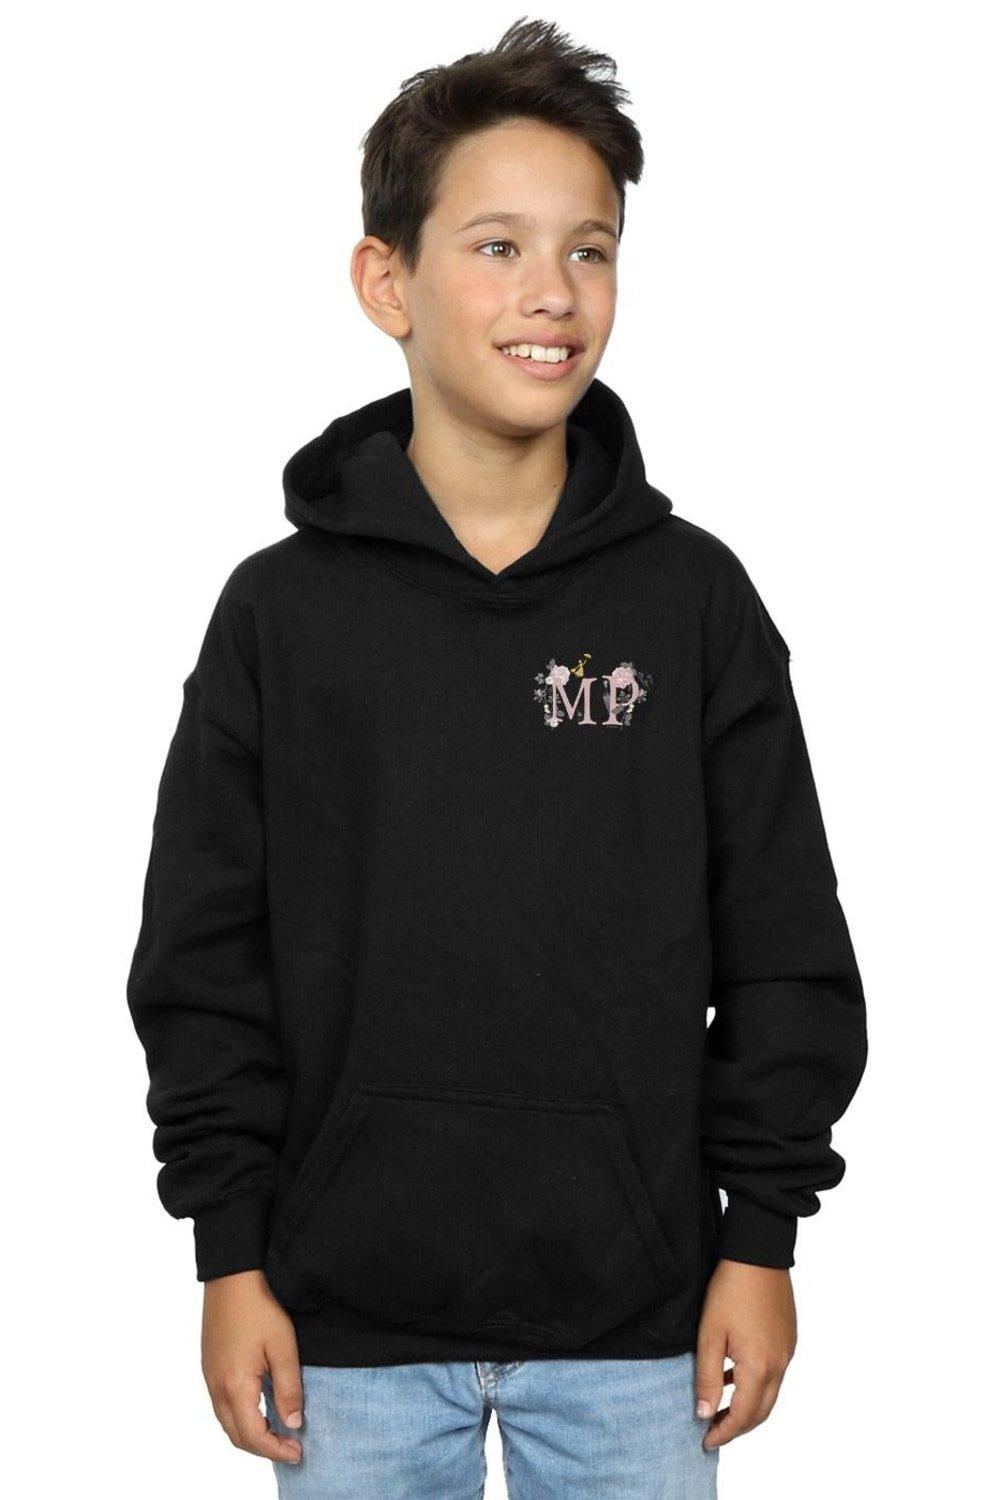 Mary Poppins Letter Breast Print Hoodie